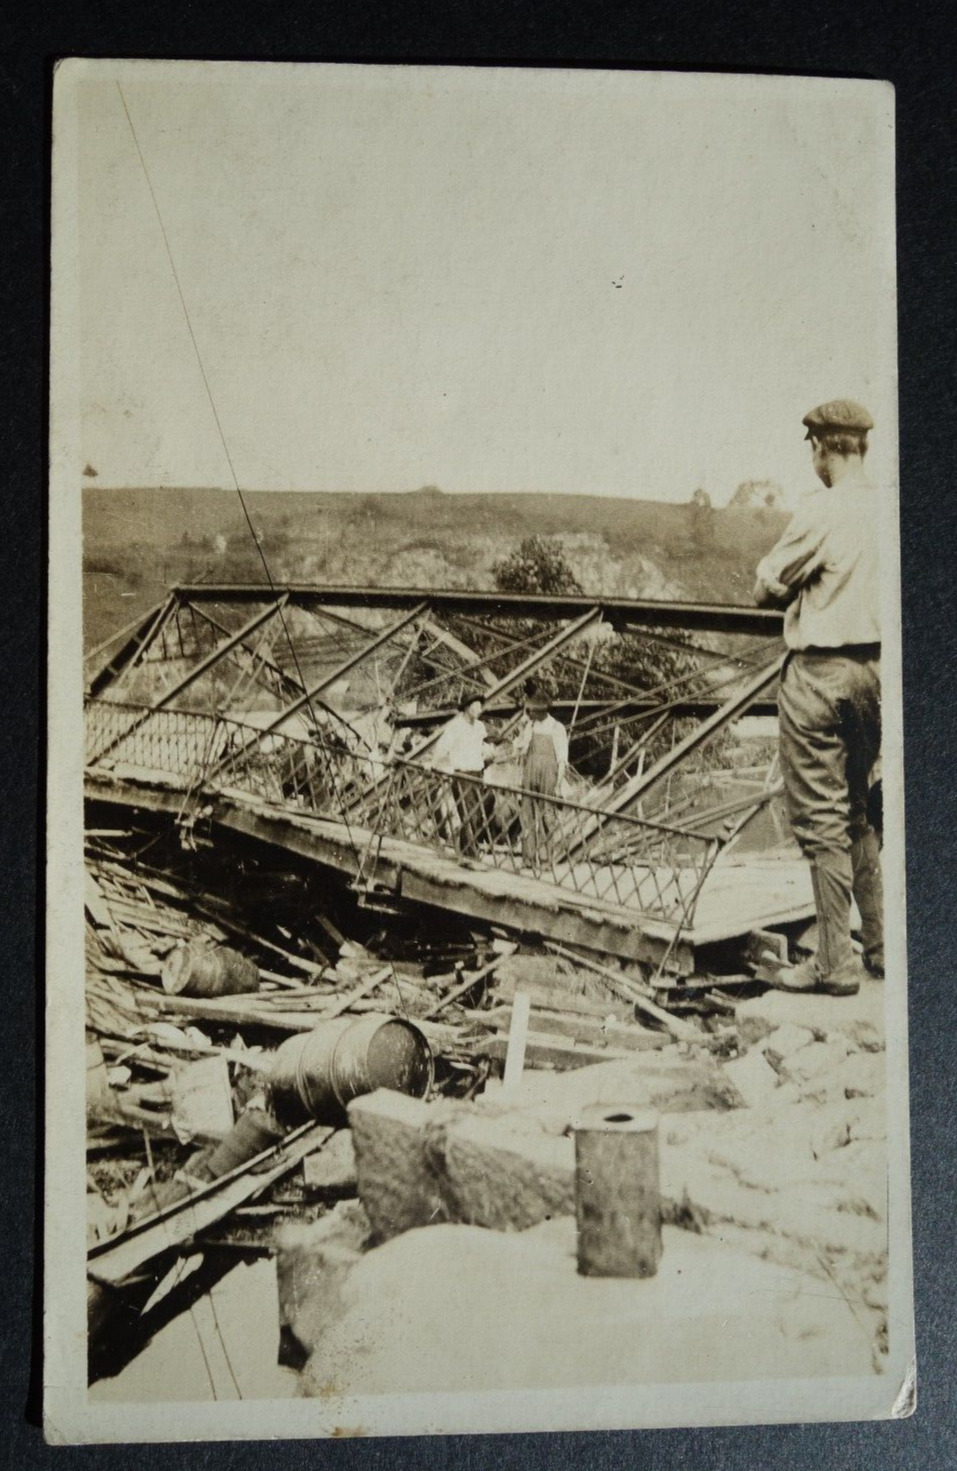 washed out bridge and debris, flood disaster real photo postcard unknown loc